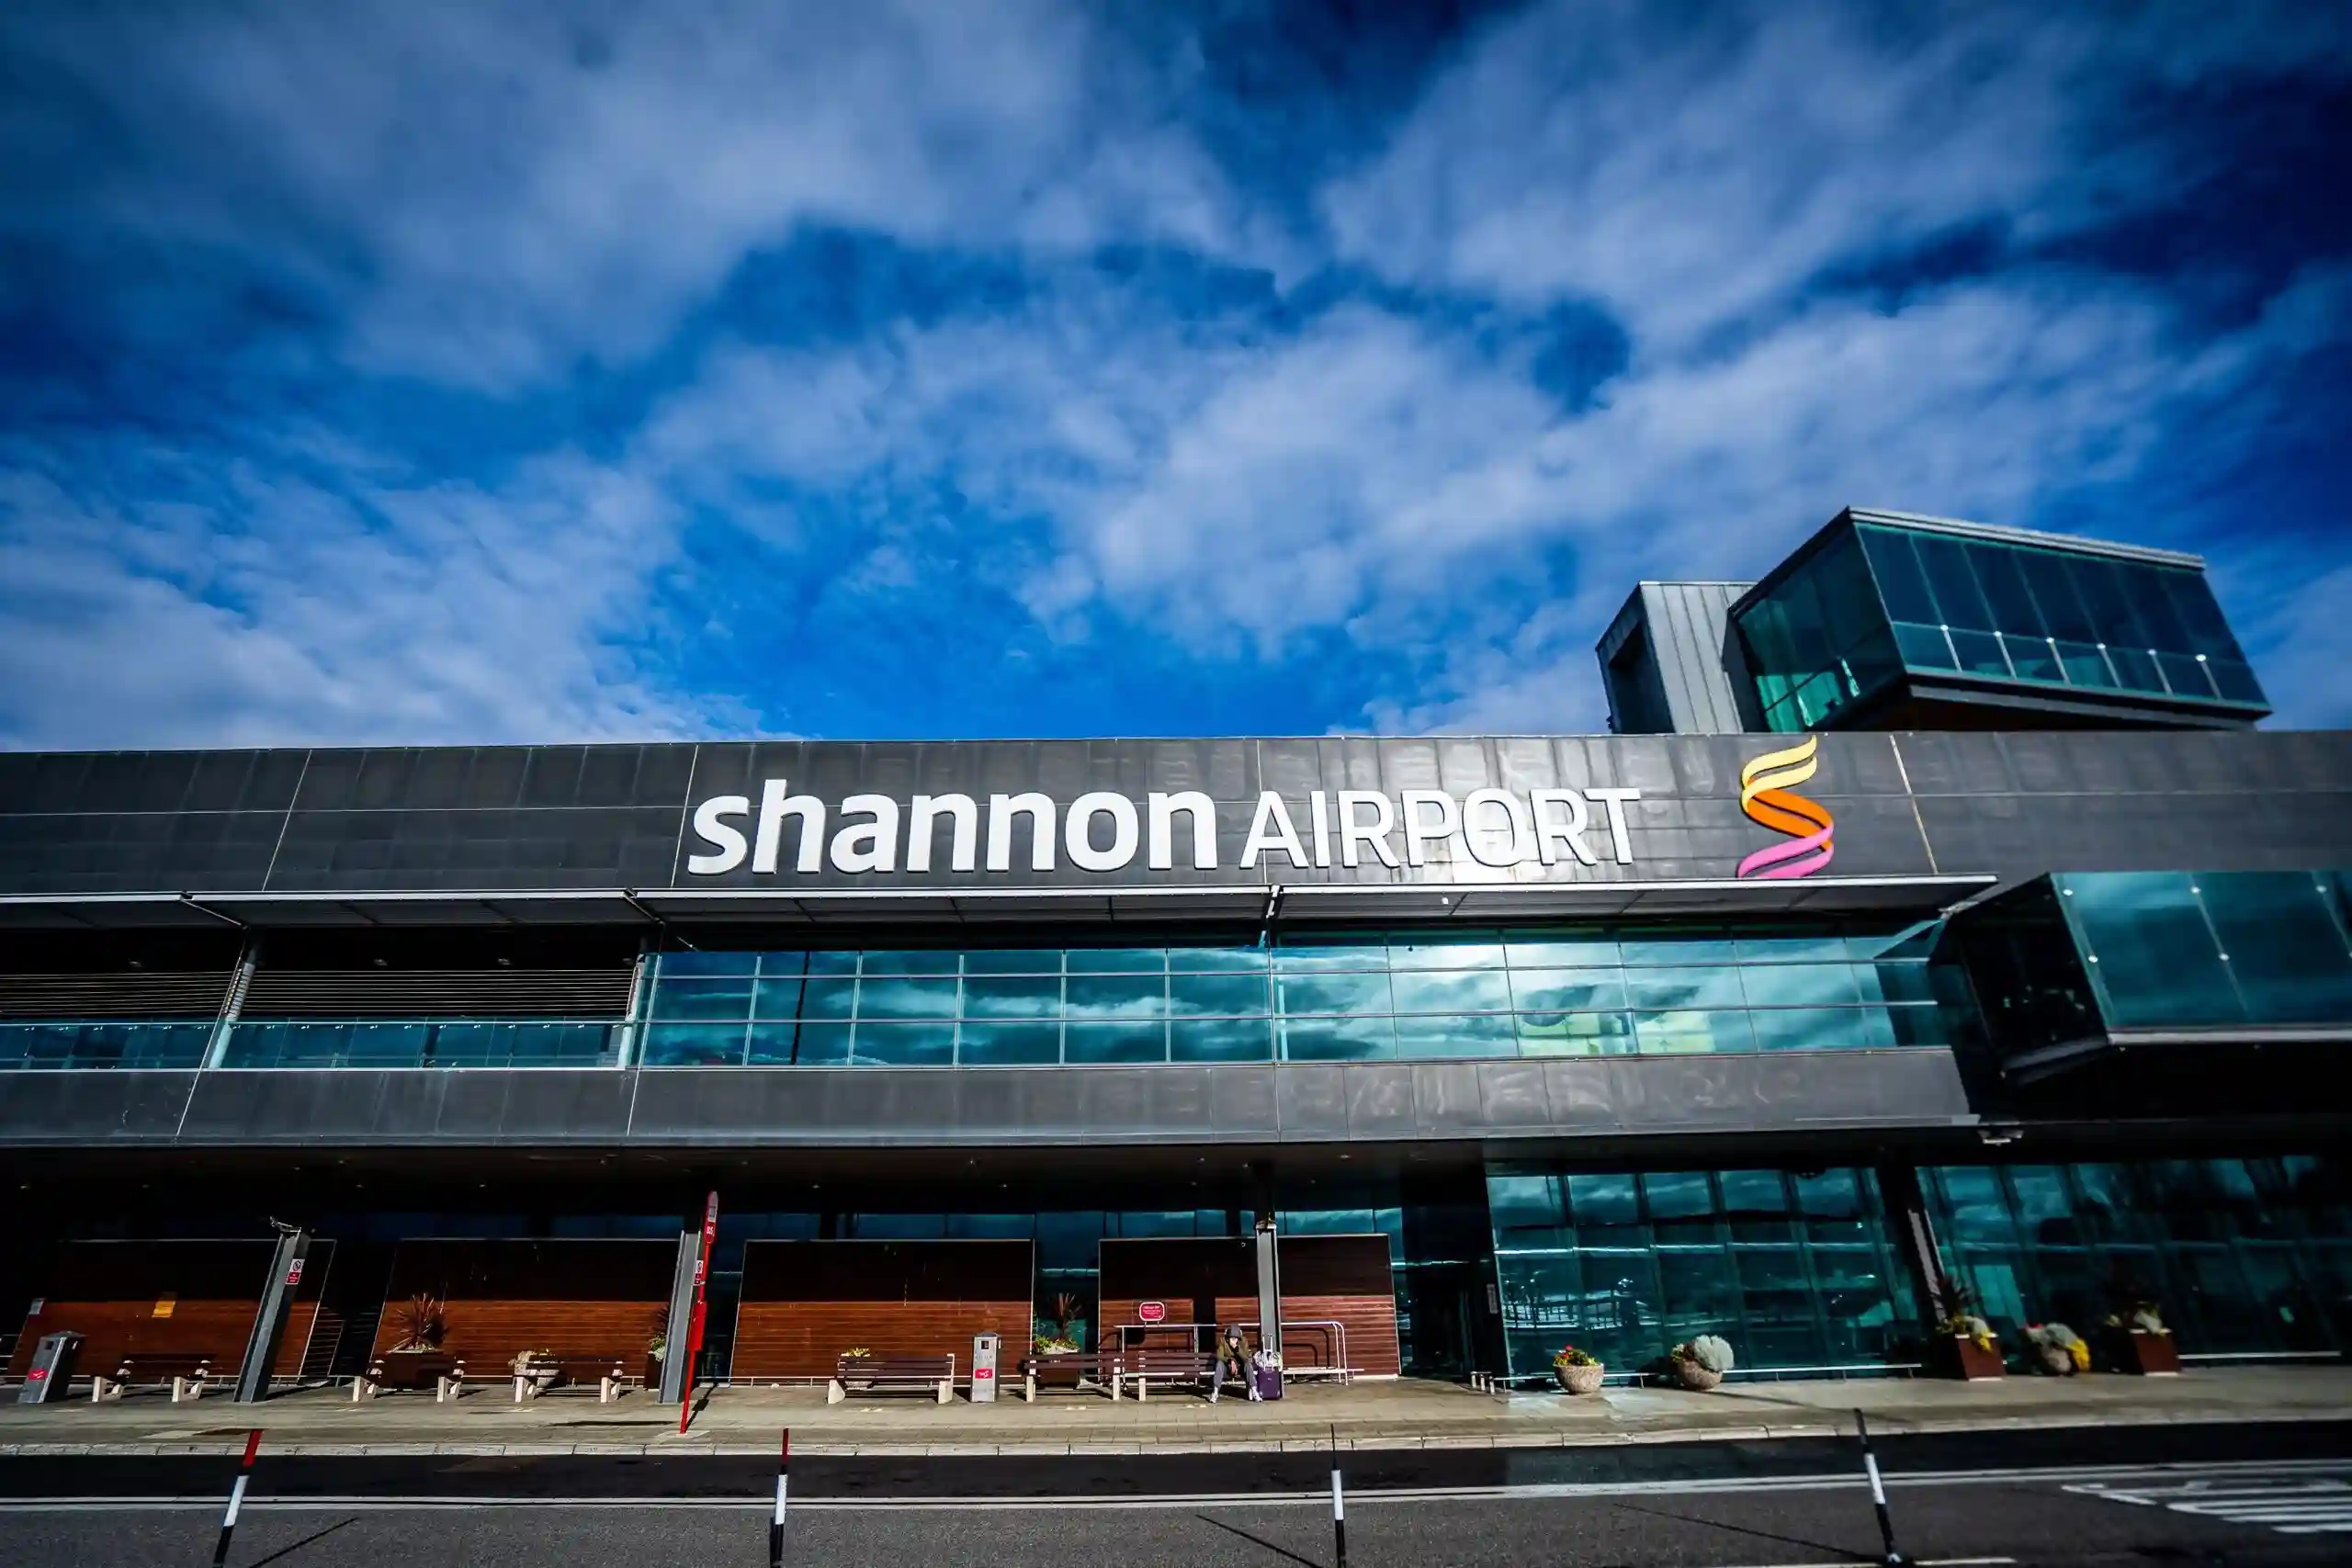 'Kids Fly Free' offer on Shannon Airport's special package